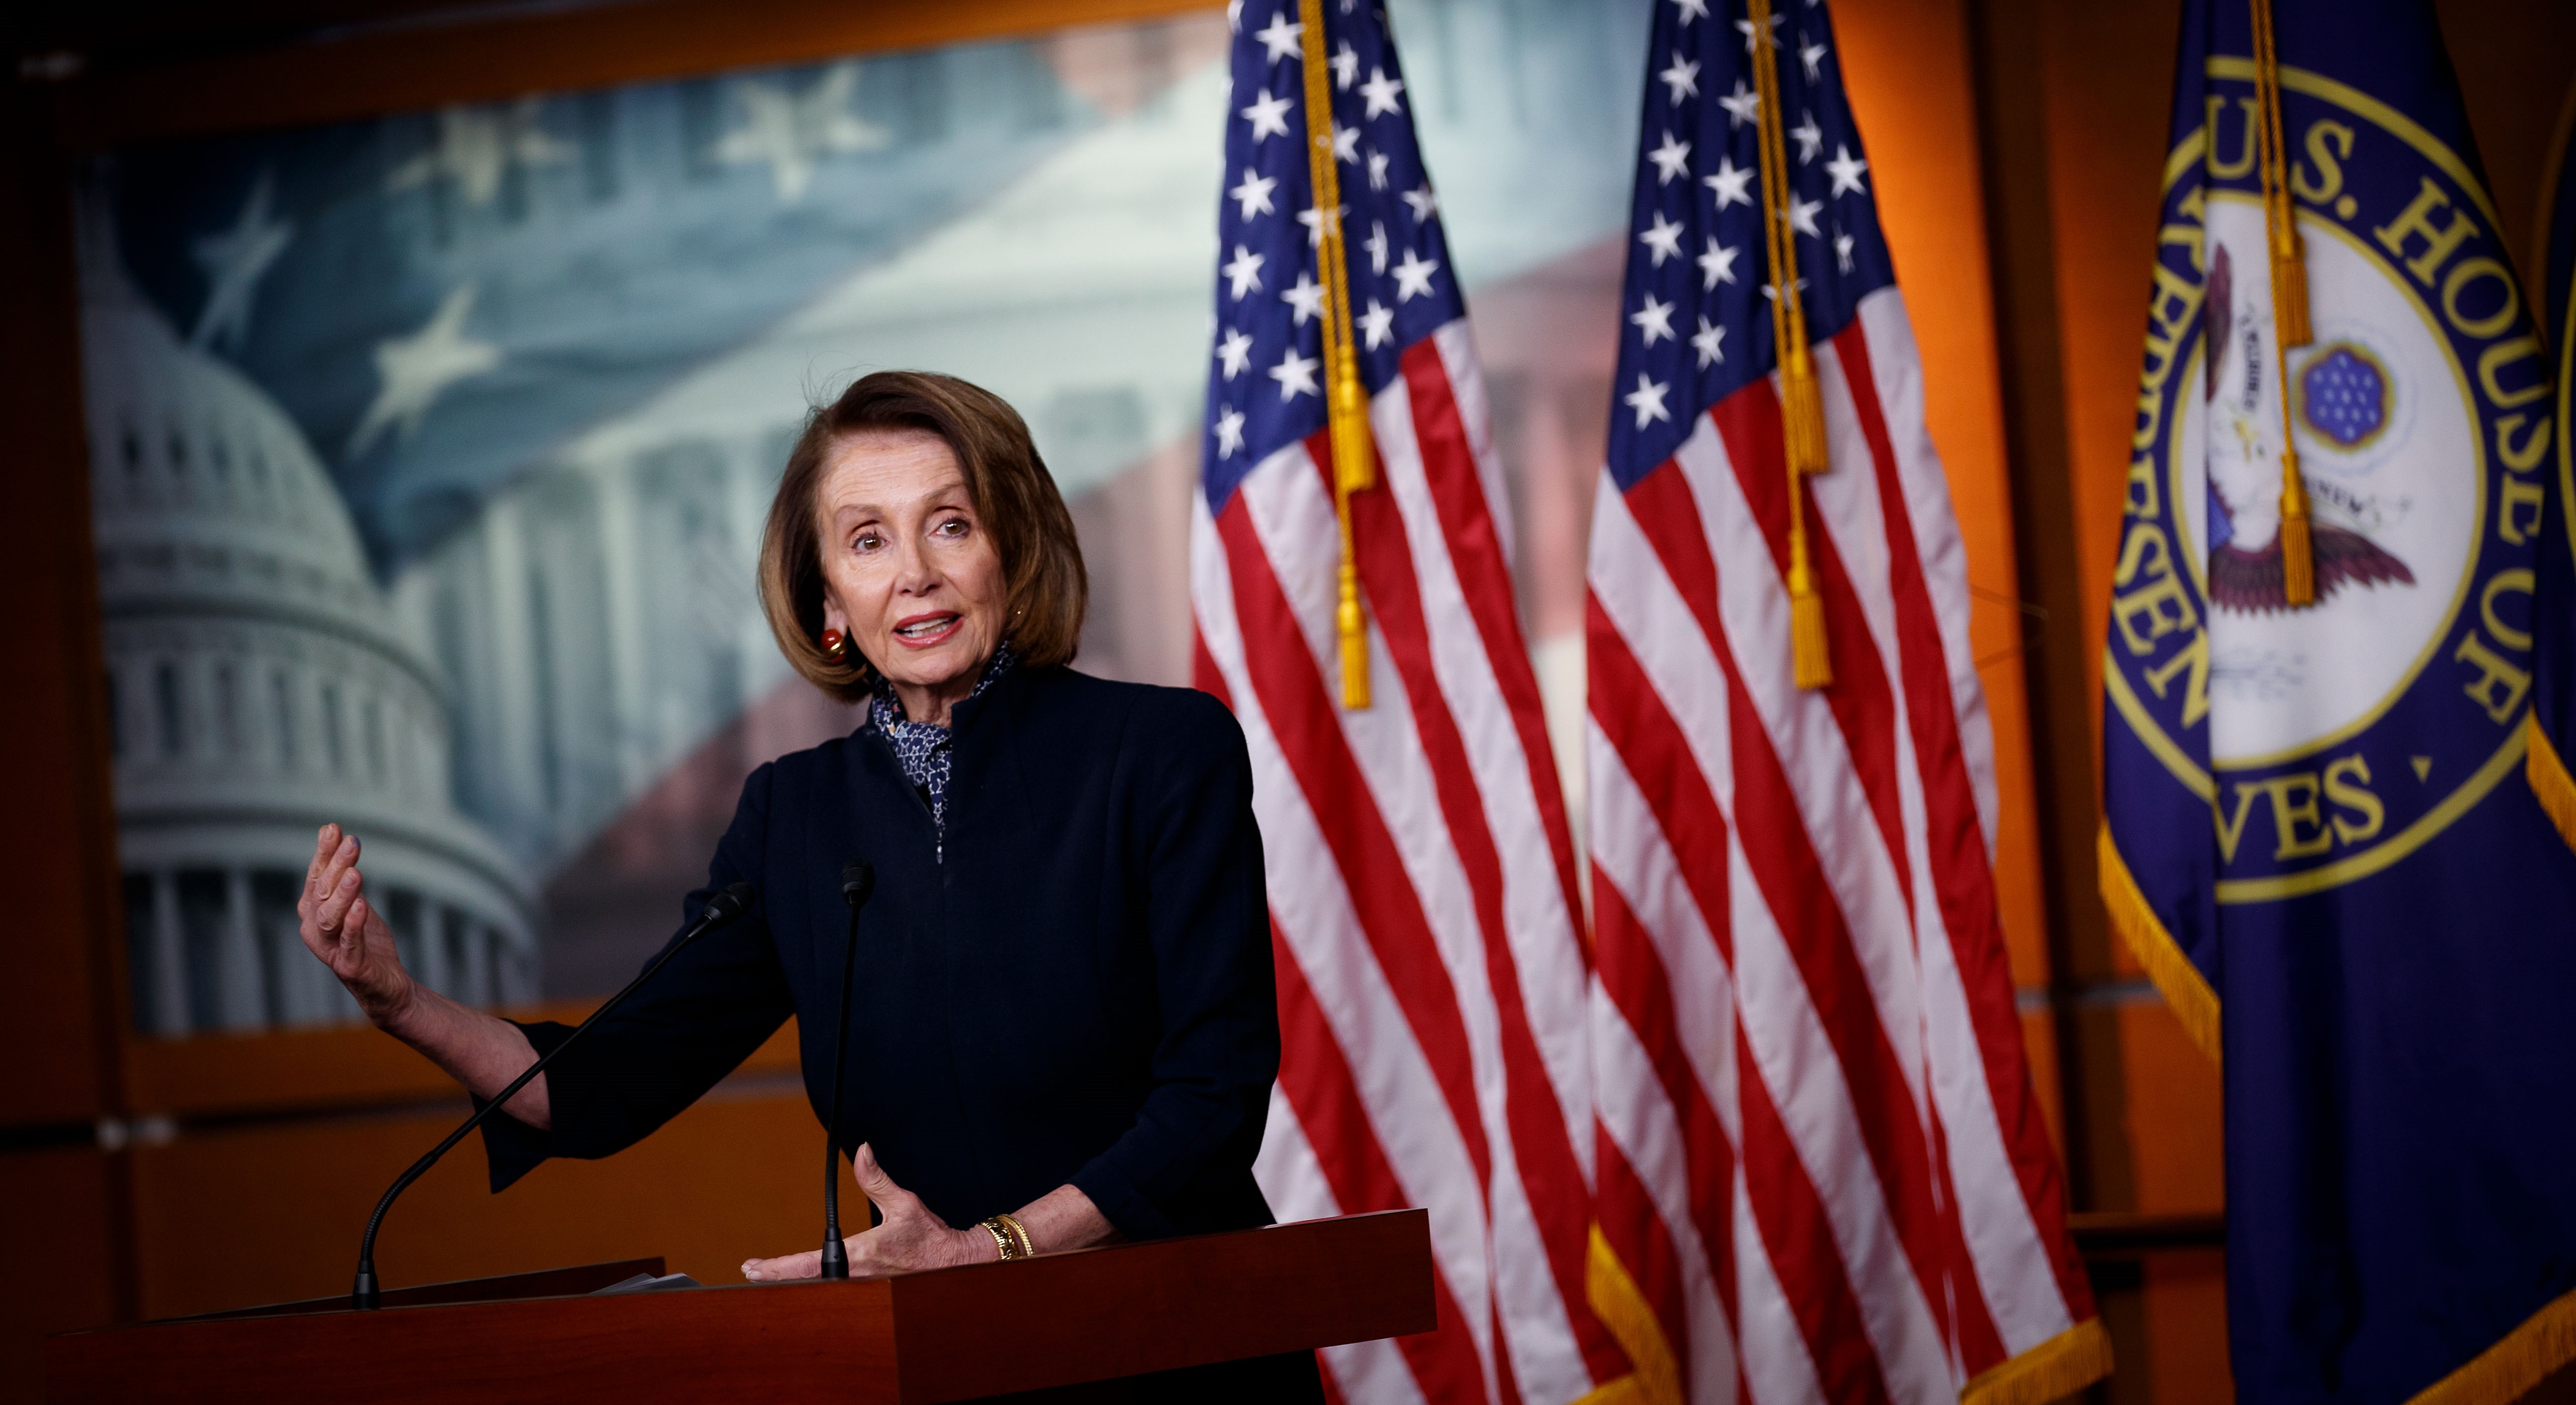 Pelosi says Republicans will pay price for denying impeachment witnesses